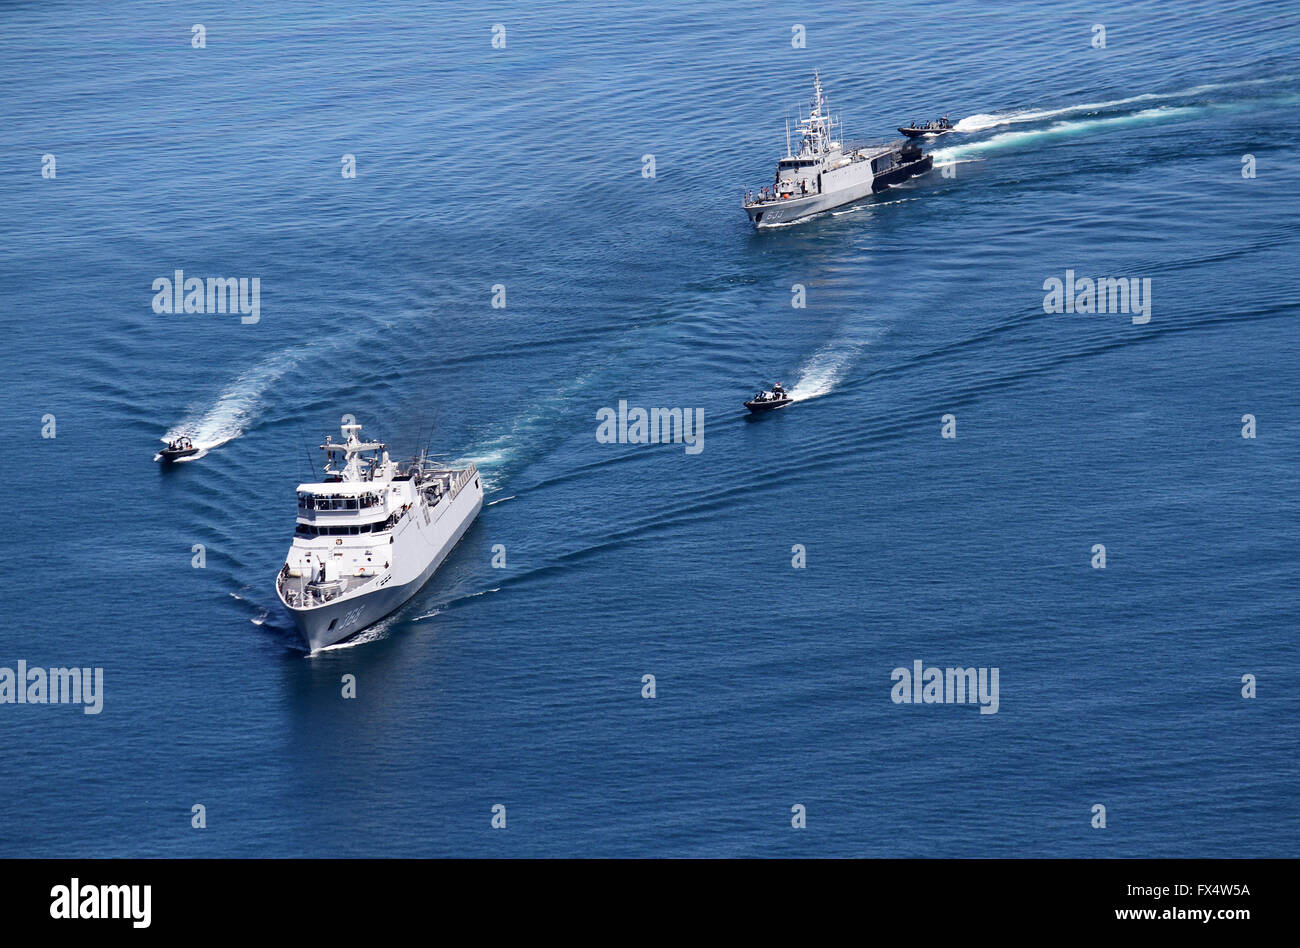 Padang, West Sumatra, Indonesia. 10th Apr, 2016. WEST SUMATRA, INDONESIA - APRIL 10 : Warship join opening of Multilateral Naval Exercise Komodo 2016 on April 10, 2016 in Padang, West Sumatra, Indonesia."Komodo 2016"" are activities which is organized by Indonesian Navy and will be held on 12 to 16 April 2016 in Padang and Mentawai Island. These activity are composed with International Fleet Review (IFR) 2016, 15th Western Pacific Naval Symposium (WPNS) and 2nd Multilateral Naval Exercise Komodo or Multilateral Naval Exercise Komodo 2016. These activity are followed by 35 countries. All p Stock Photo